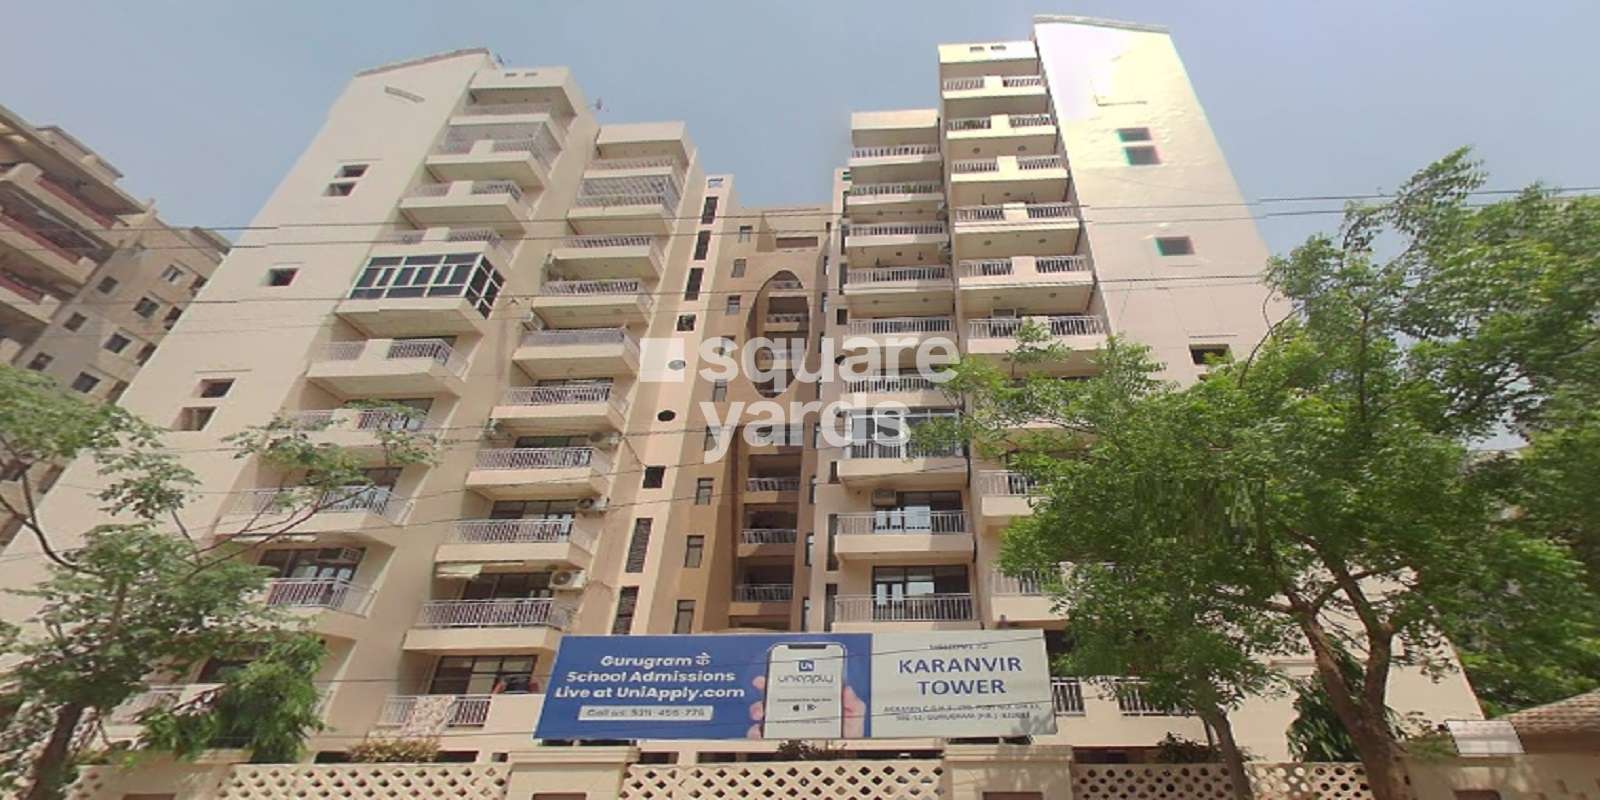 Agrasen Apartment Cover Image